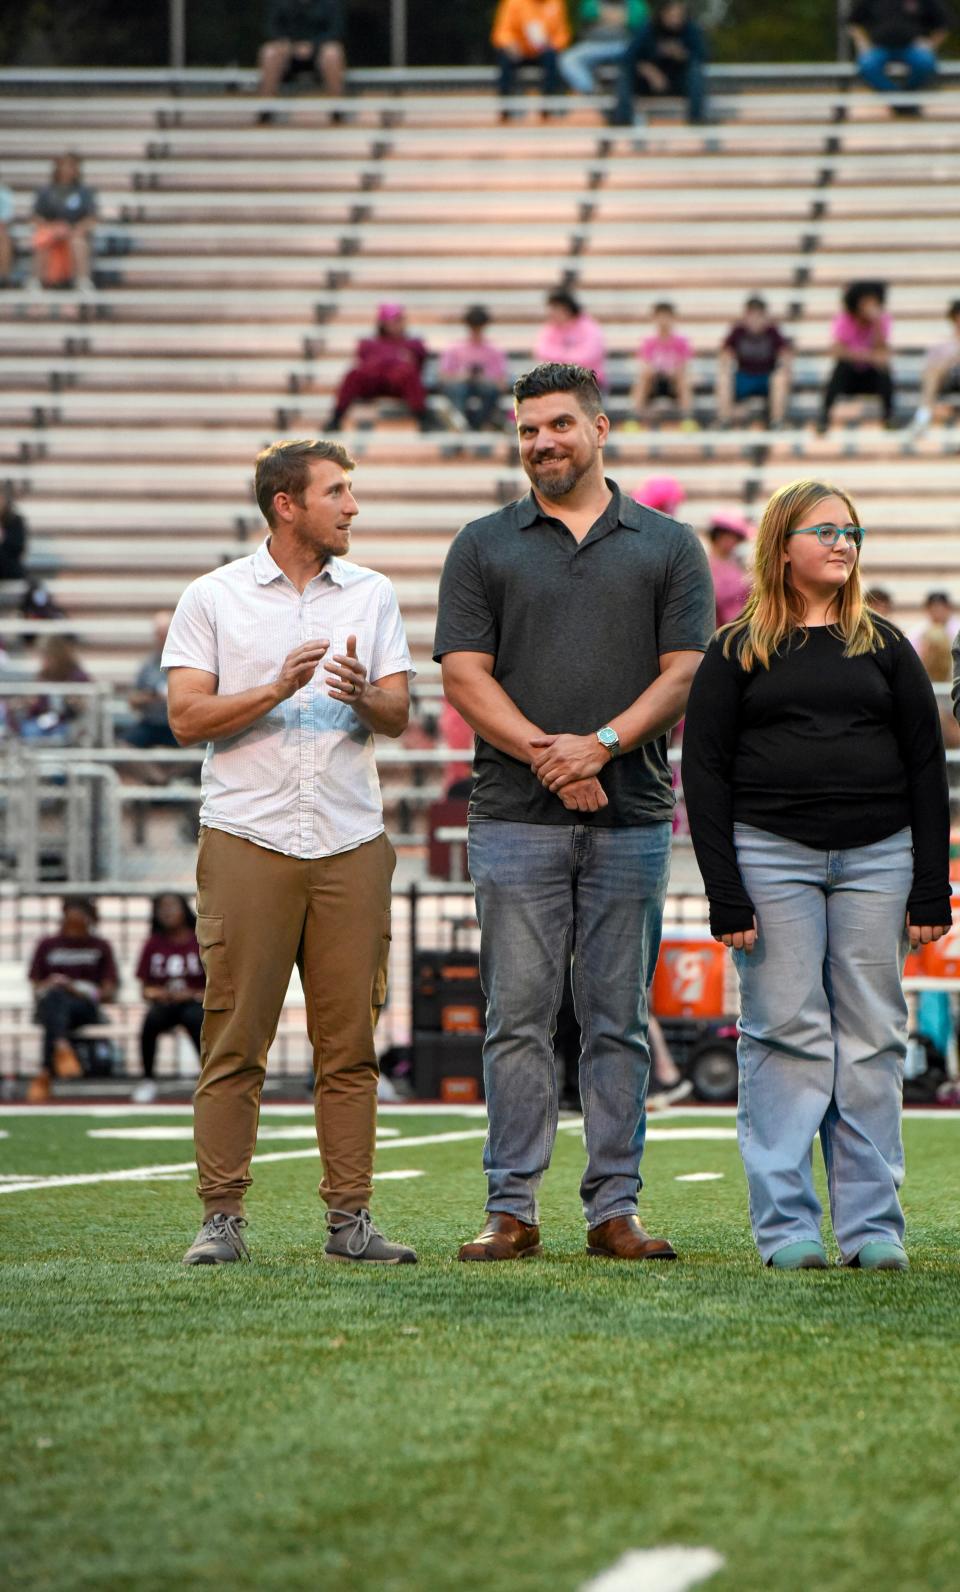 Nick Orlando's family Nathan Worley, Jonathan Worley, and Taylor McBryar were on hand Oct. 13 as he was honored with a CareActer Award for his impact on the Oak Ridge community and young people.